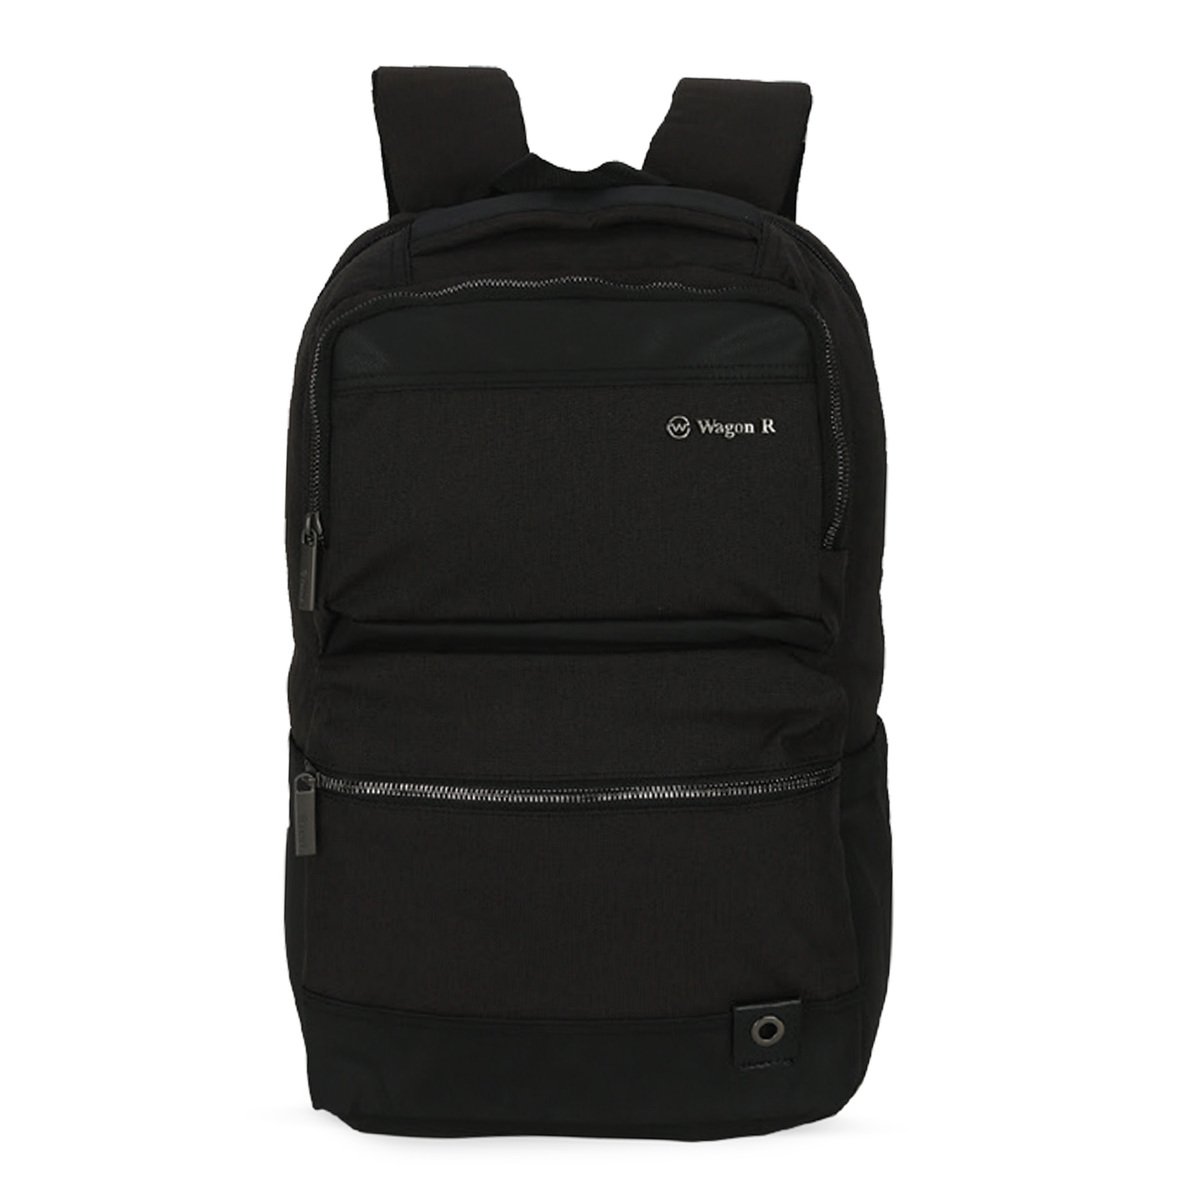 Wagon R Smart Backpack CS2557 19inch Assorted